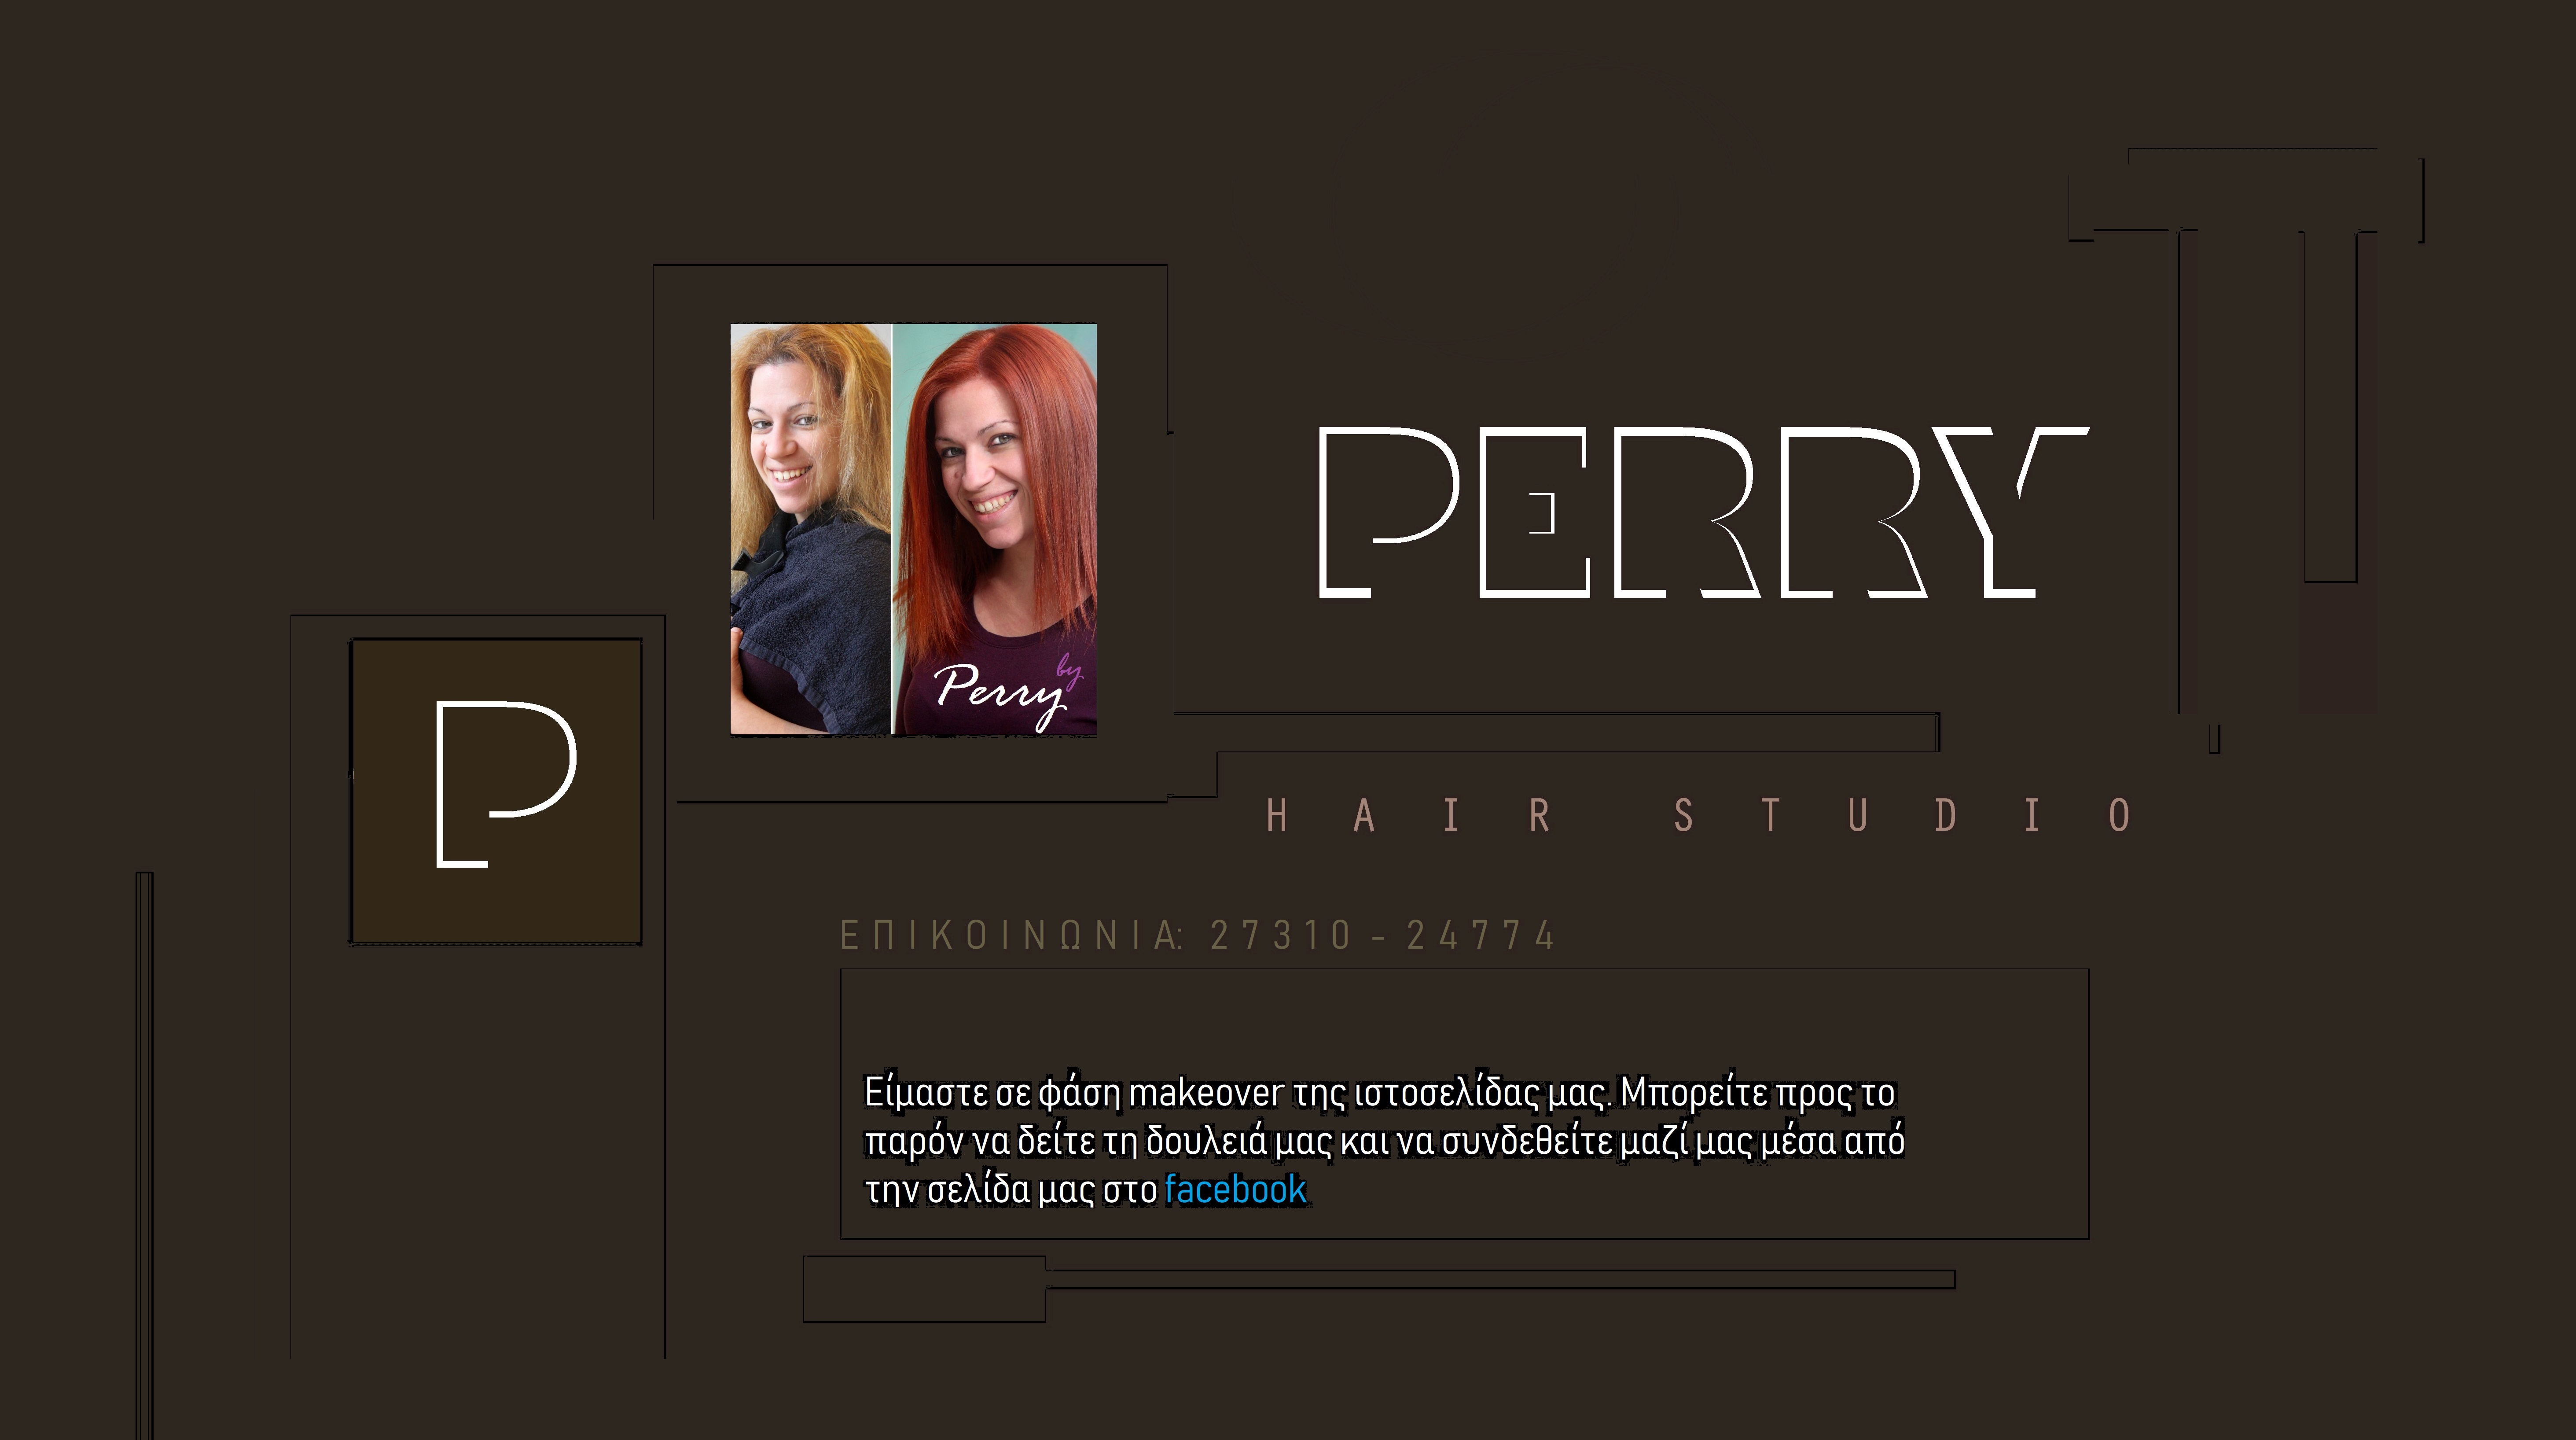 Welcome to Perry hair studio